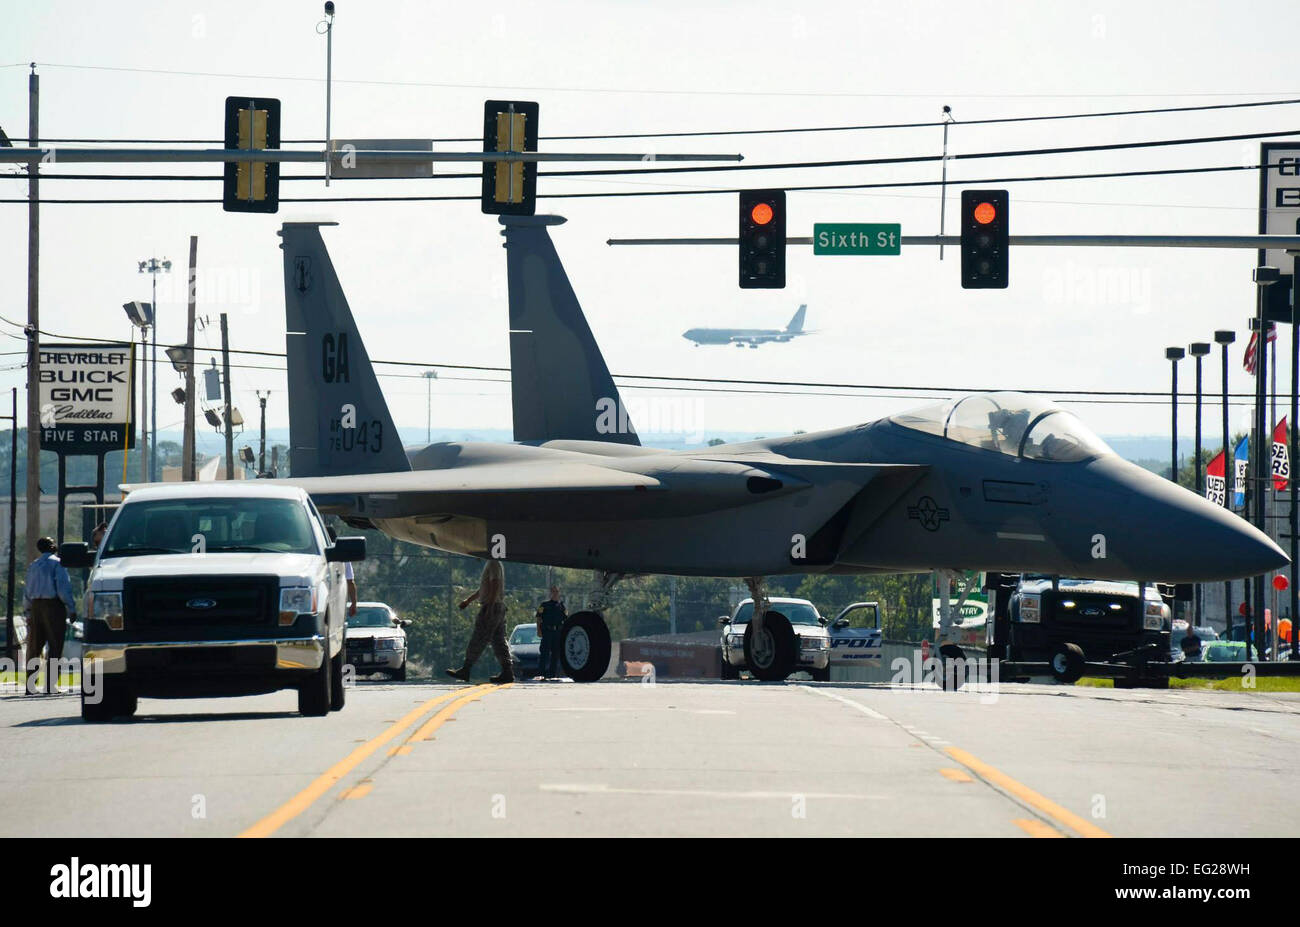 Airmen maneuver through traffic lights while towing an F-15 Eagle down Watson Boulevard Sept. 6, 2014, to the Warner Robins City Hall, Warner Robins, Ga. The aircraft was loaned to the city by the Georgia Air National Guard’s 116th Air Control Wing to serve as a static display for a new veteran’s memorial. The Airmen moving the aircraft are assigned to the 116th Maintenance Group.  Tech. Sgt. Regina Young Stock Photo